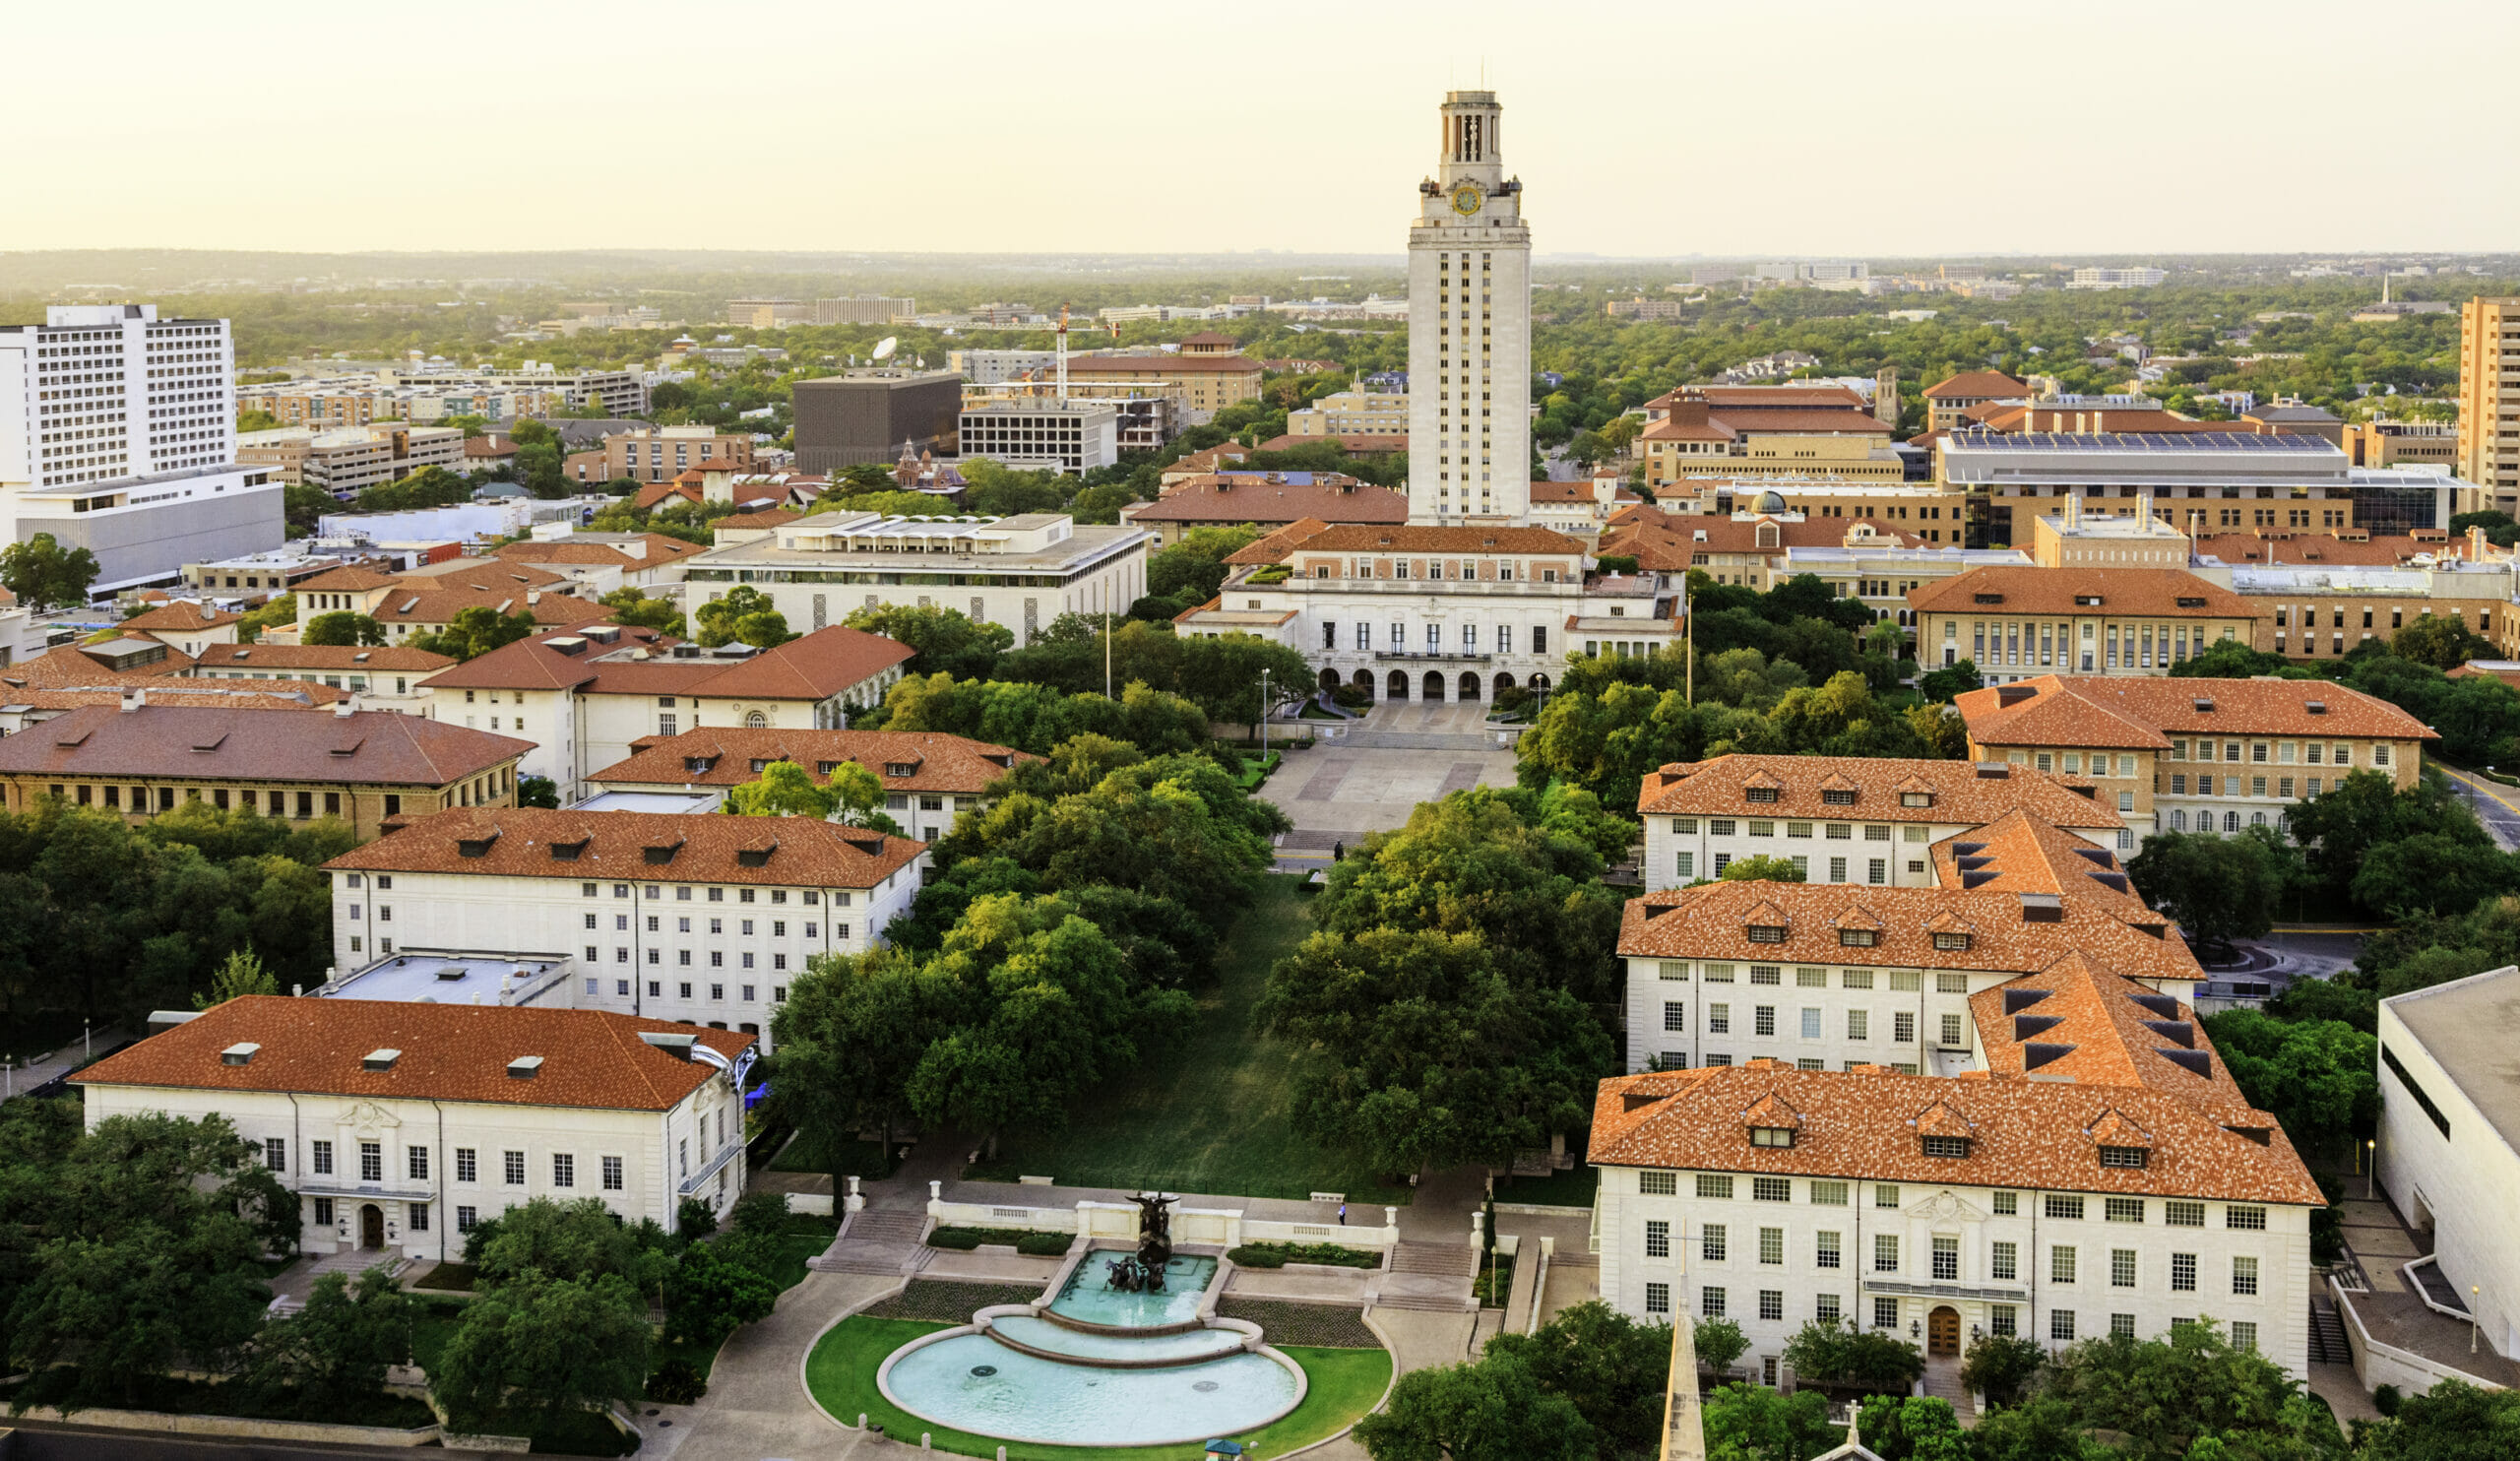 school and higher education law image, University of Texas Austin campus at sunset-dusk, aerial view